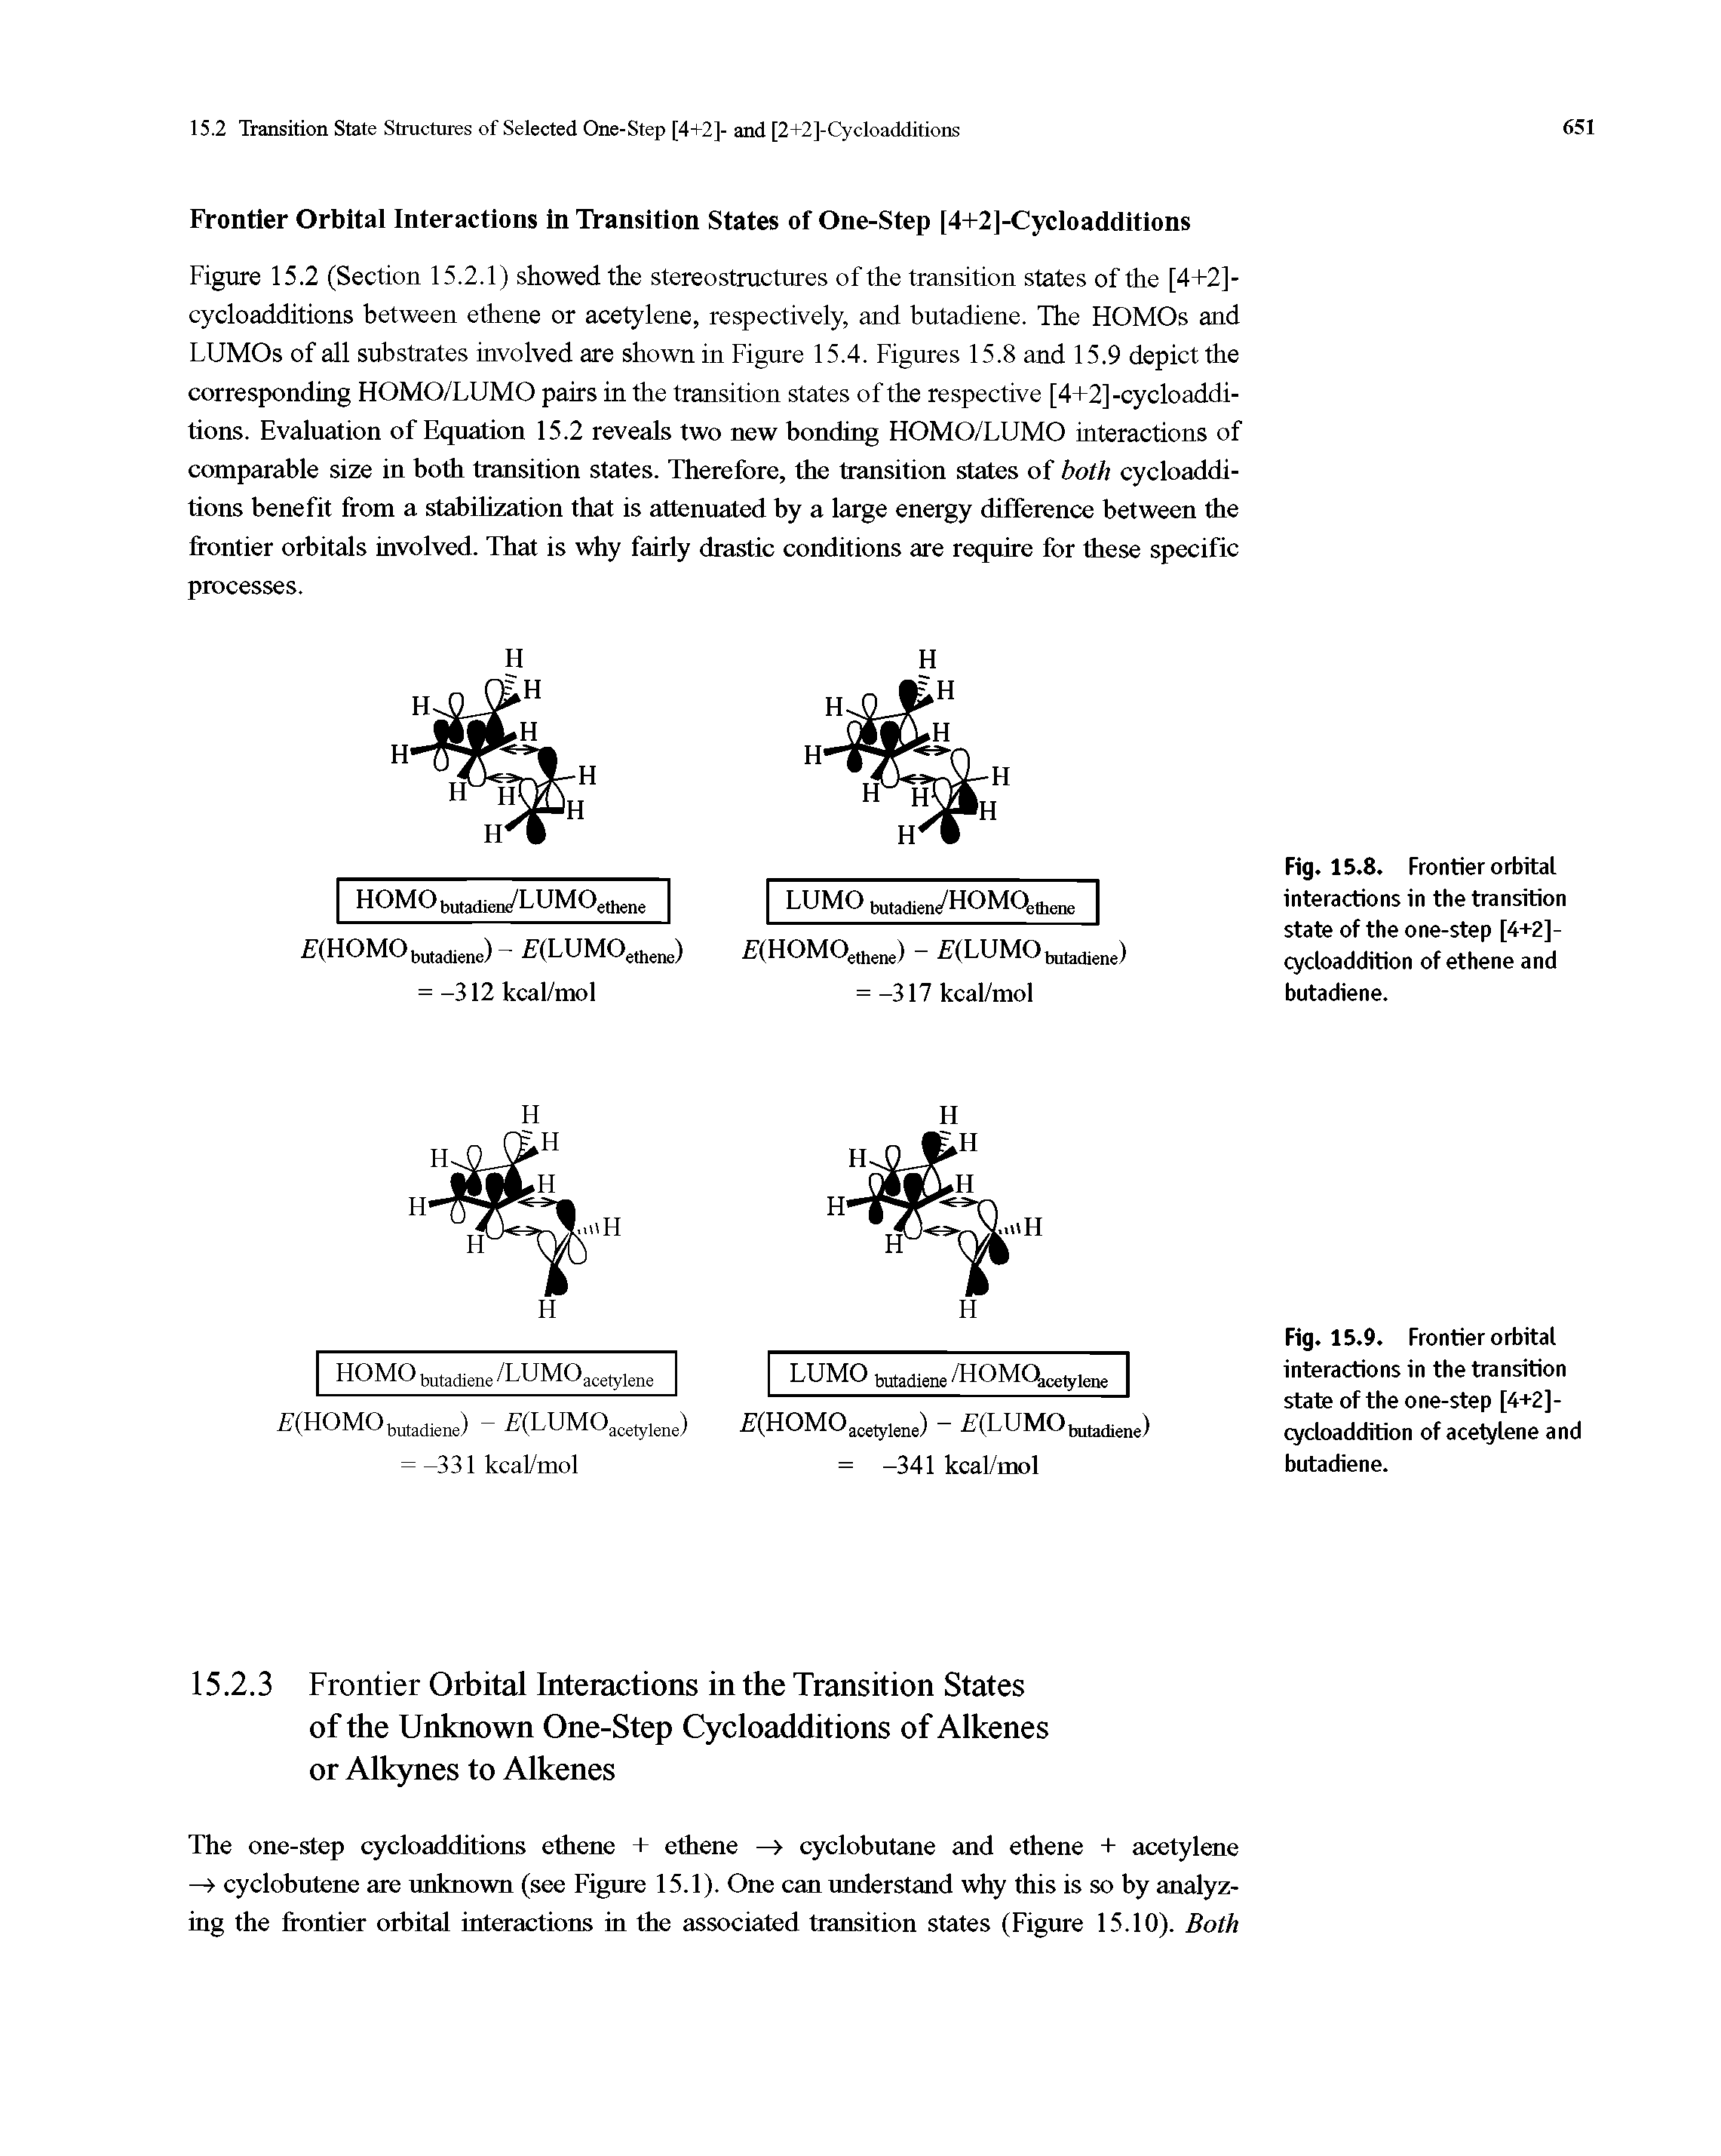 Figure 15.2 (Section 15.2.1) showed the stereostructures of the transition states of the [4+2]-cycloadditions between ethene or acetylene, respectively, and butadiene. The HOMOs and LUMOs of all substrates involved are shown in Figure 15.4. Figures 15.8 and 15.9 depict the corresponding HOMO/LUMO pairs in the transition states of the respective [4+2]-cycloaddi-tions. Evaluation of Equation 15.2 reveals two new bonding HOMO/LUMO interactions of comparable size in both transition states. Therefore, the transition states of both cycloadditions benefit from a stabilization that is attenuated by a large energy difference between the frontier orbitals involved. That is why fairly drastic conditions are require for these specific processes.